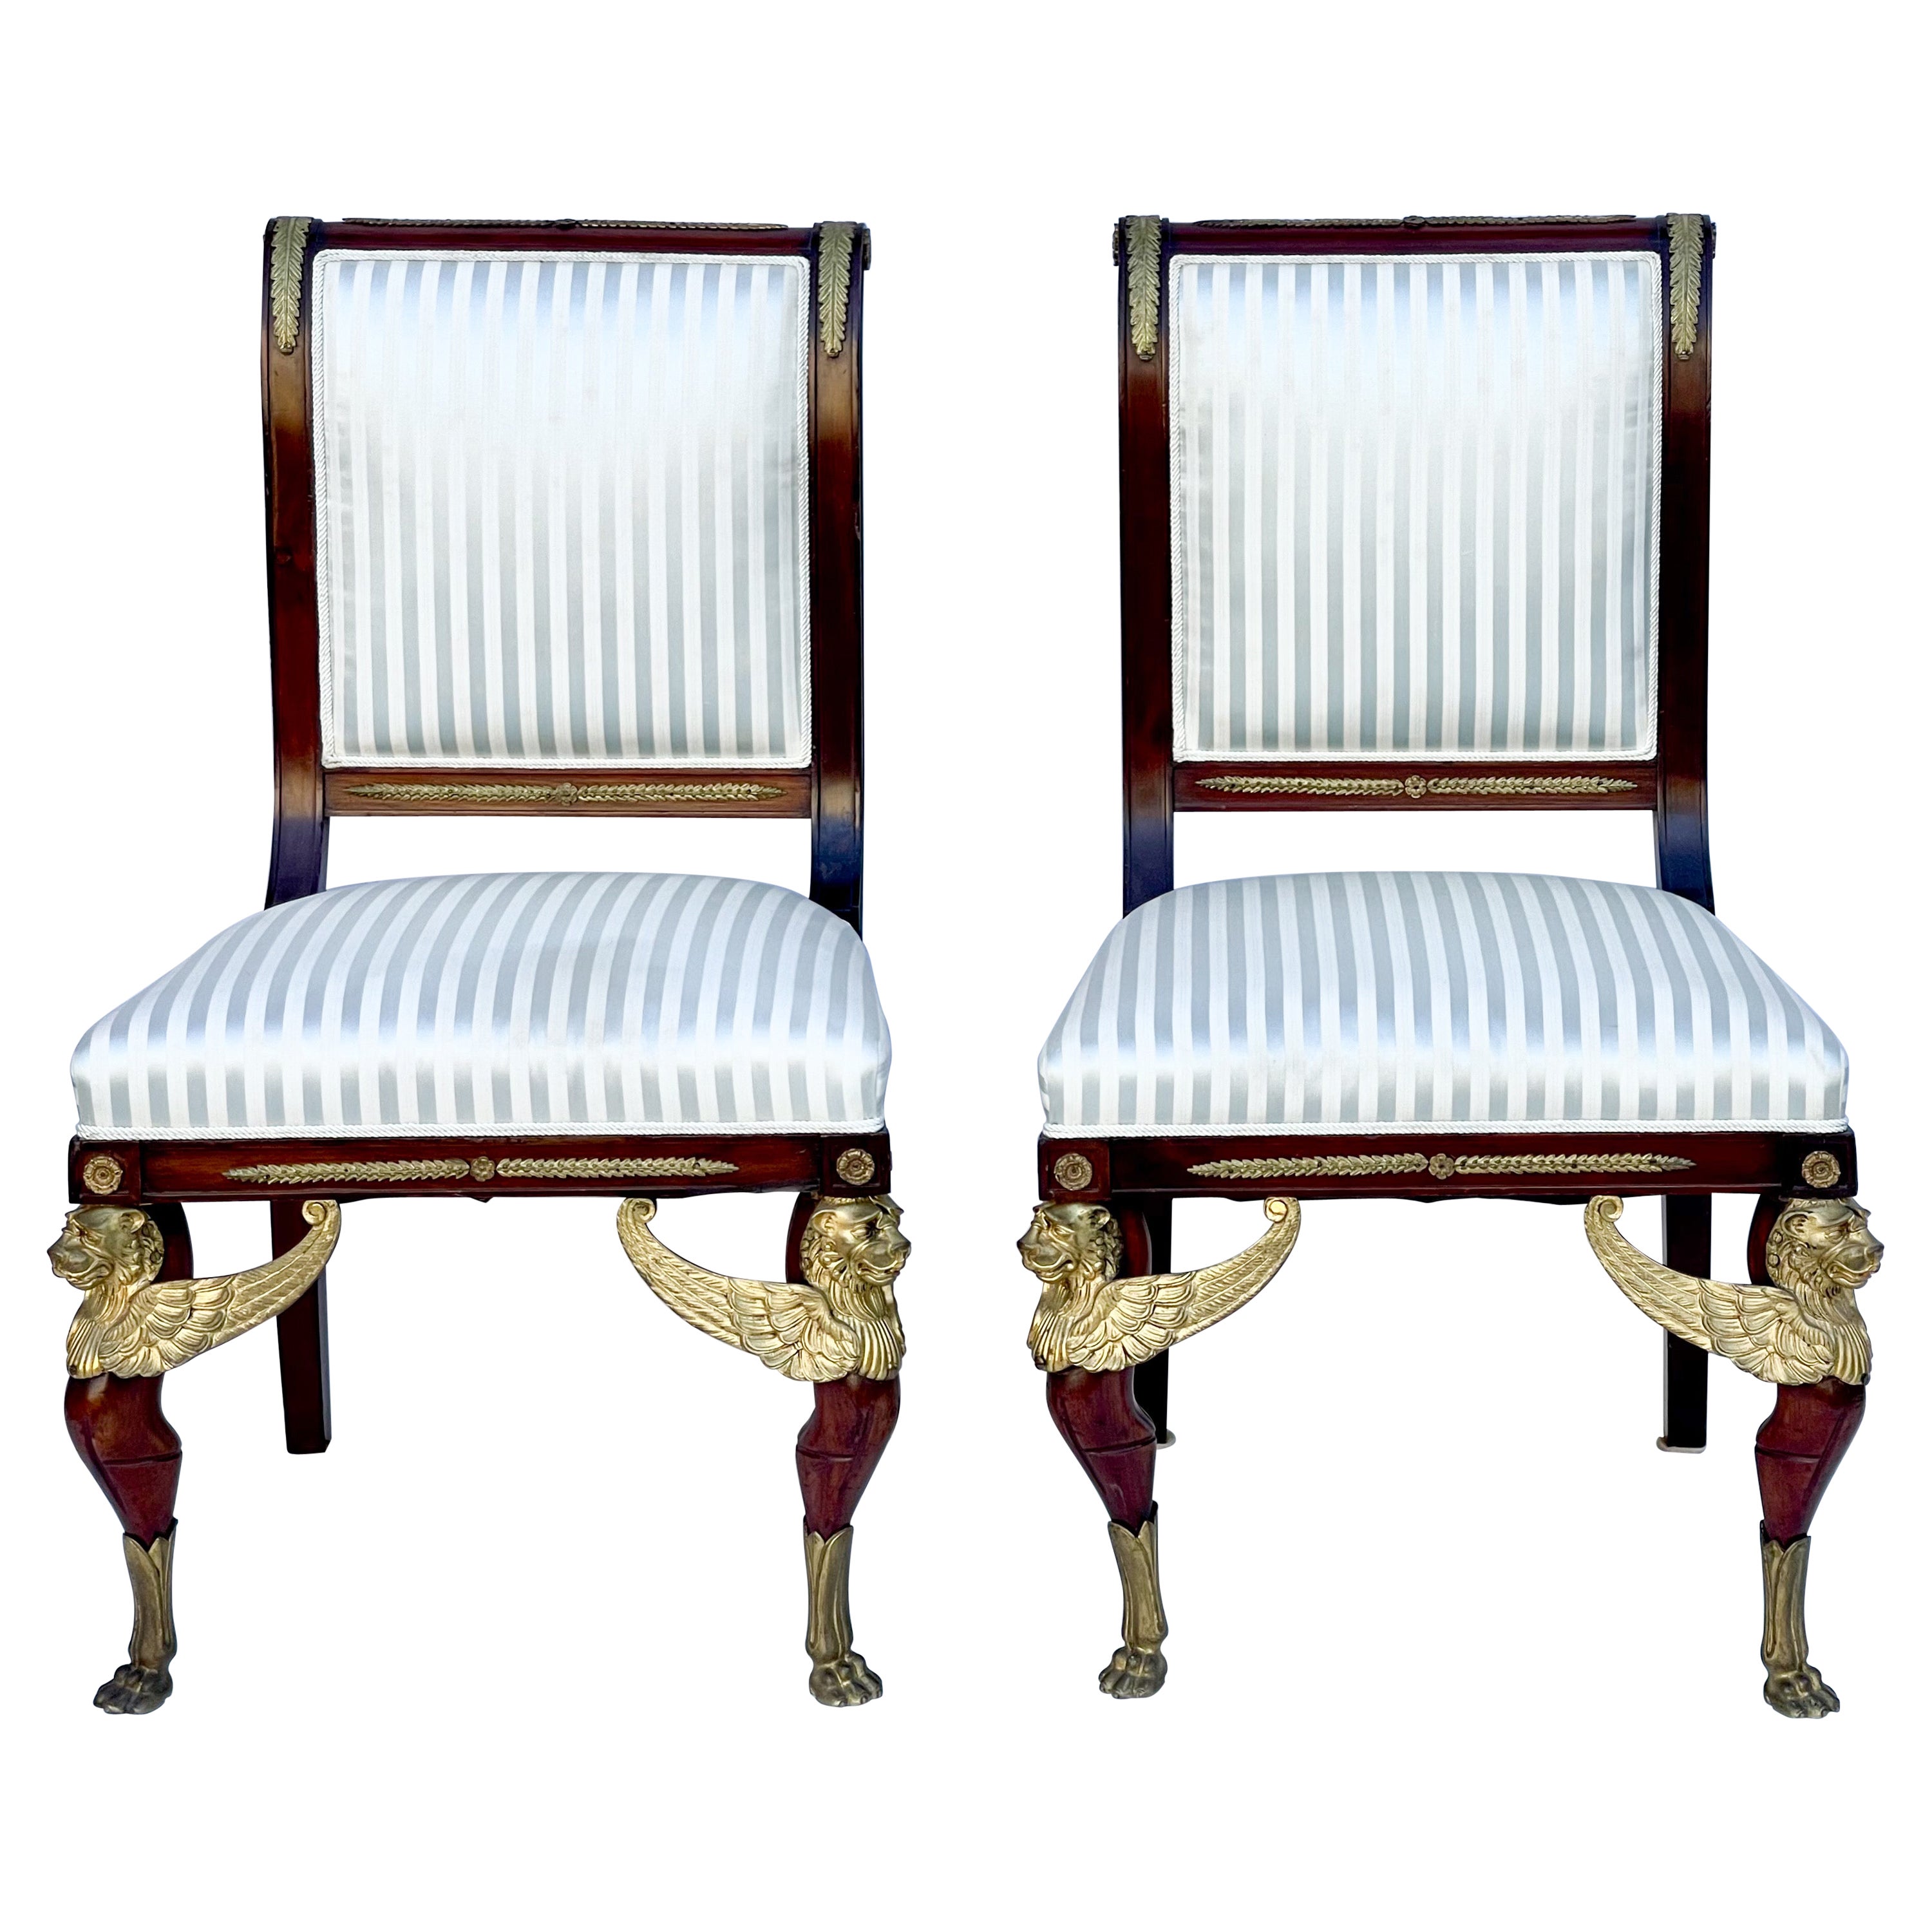 Late 19th-C. French Empire Gilt Bronze Mahogany Side Chairs - Pair 